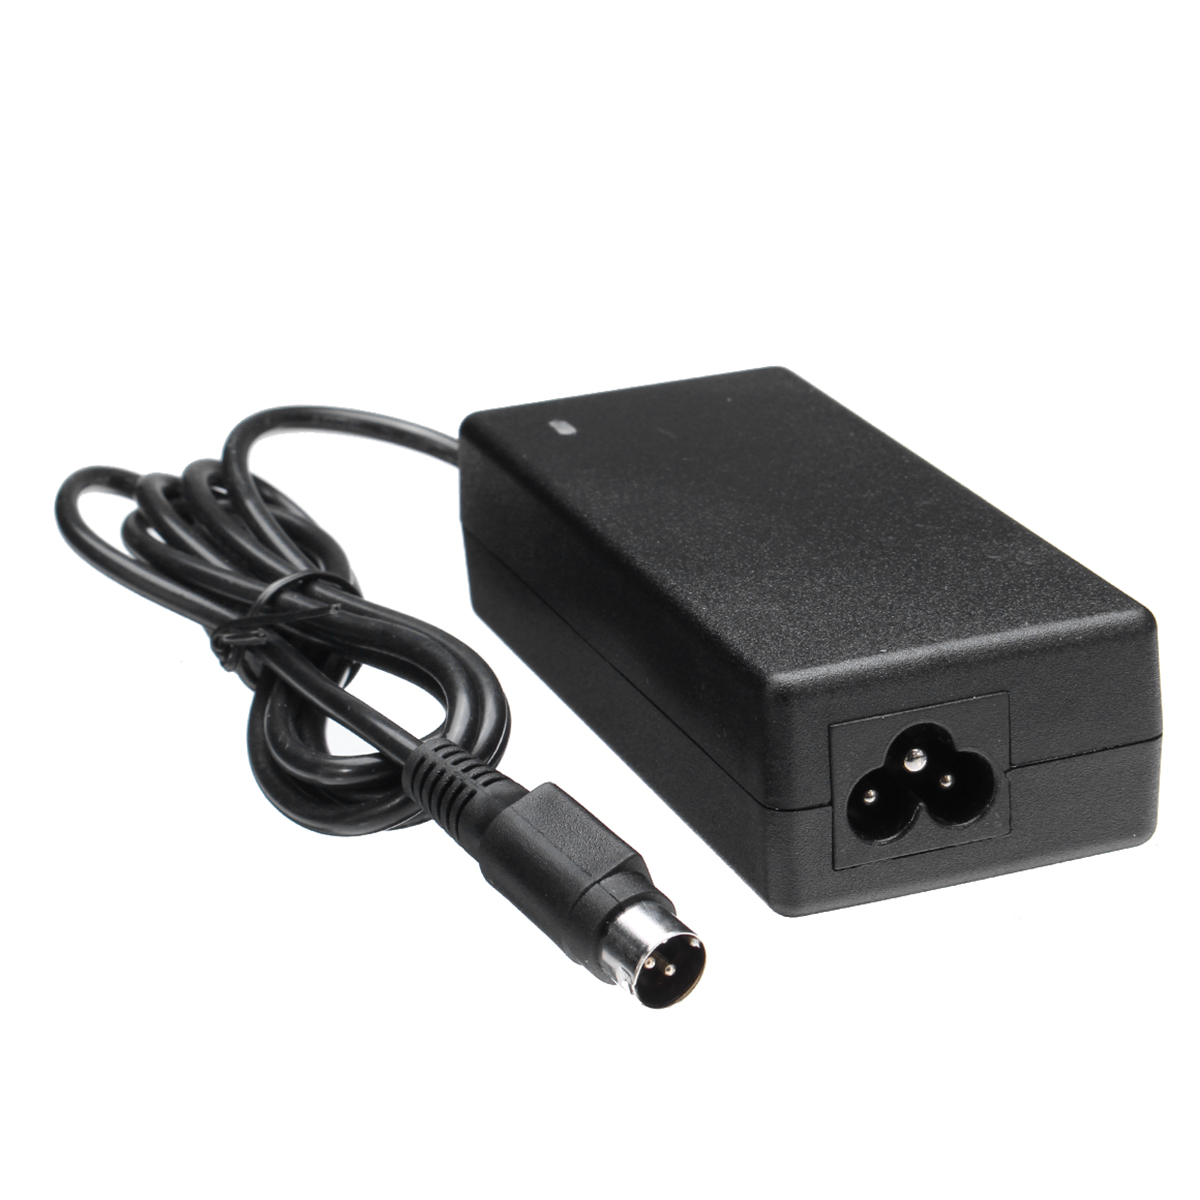 24V-3A-DC-3-Pin-Switching-Power-Supply-Adapter-Charger-100-240V-AC-Input-For-Printer-TV-Box-MP3-Came-1111657